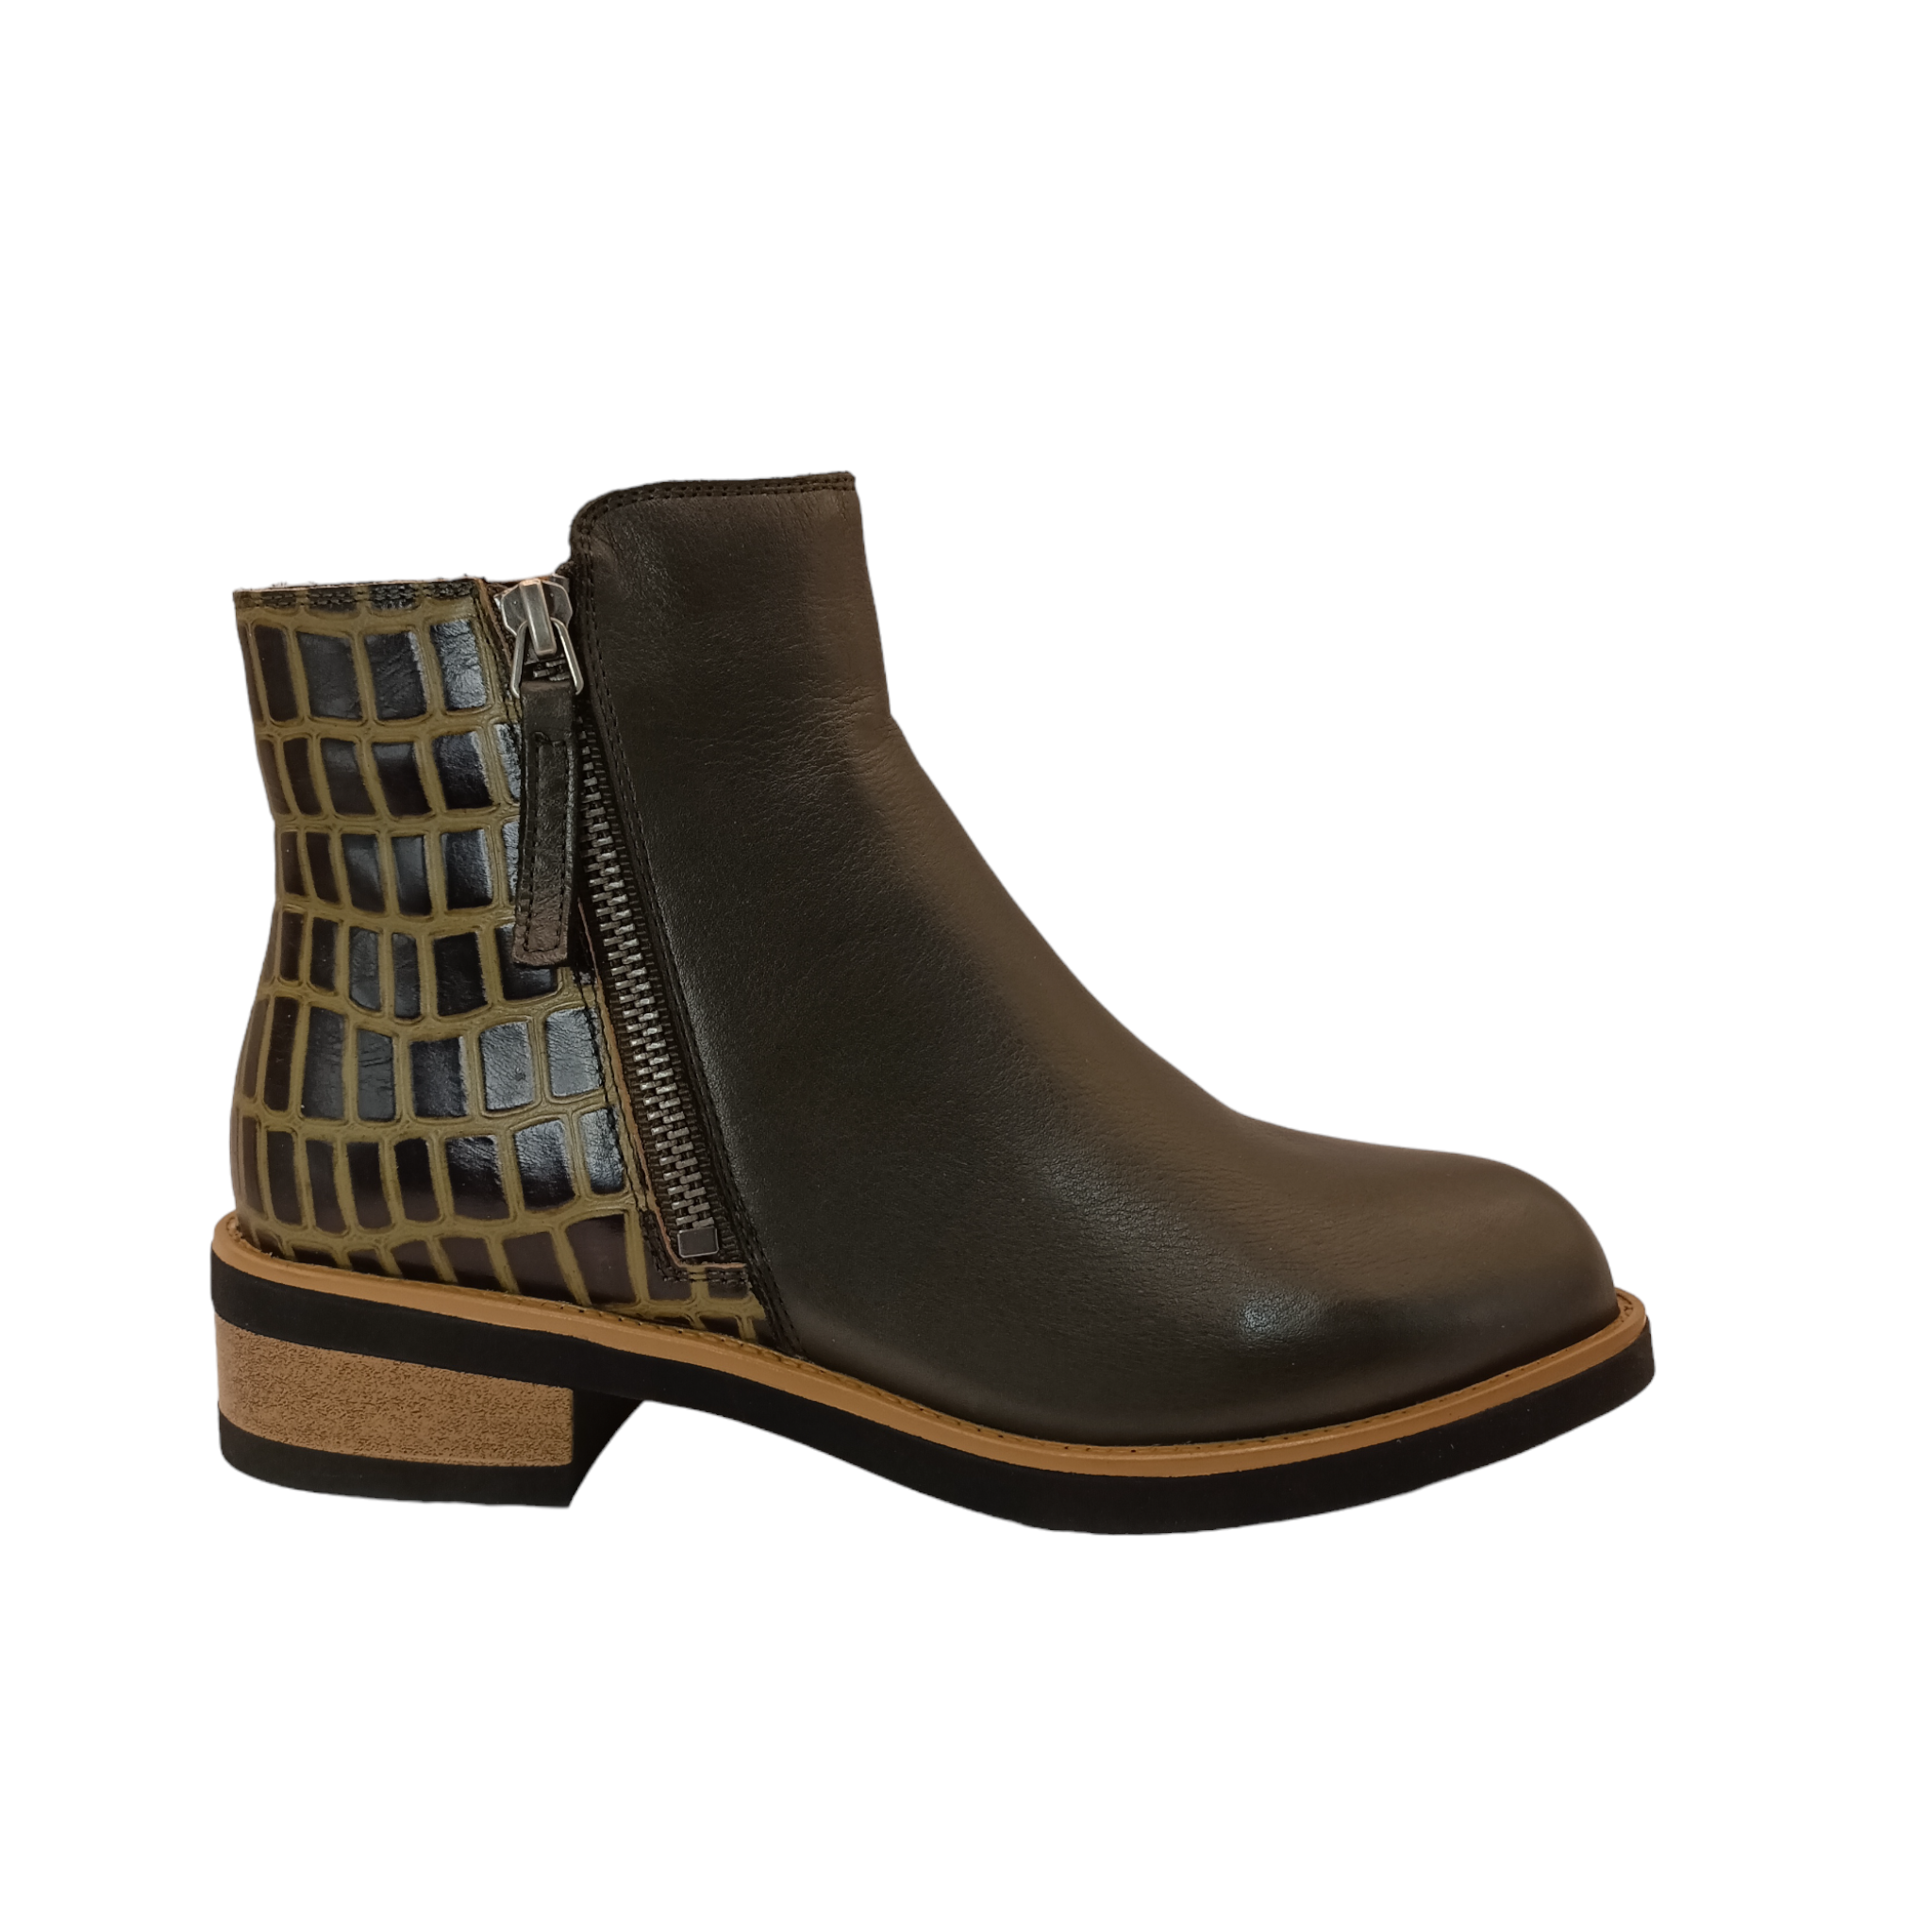 Shop Dungeon Bresley - with shoe&amp;me - from Bresley - Boots - boots, Winter, Womens - [collection]